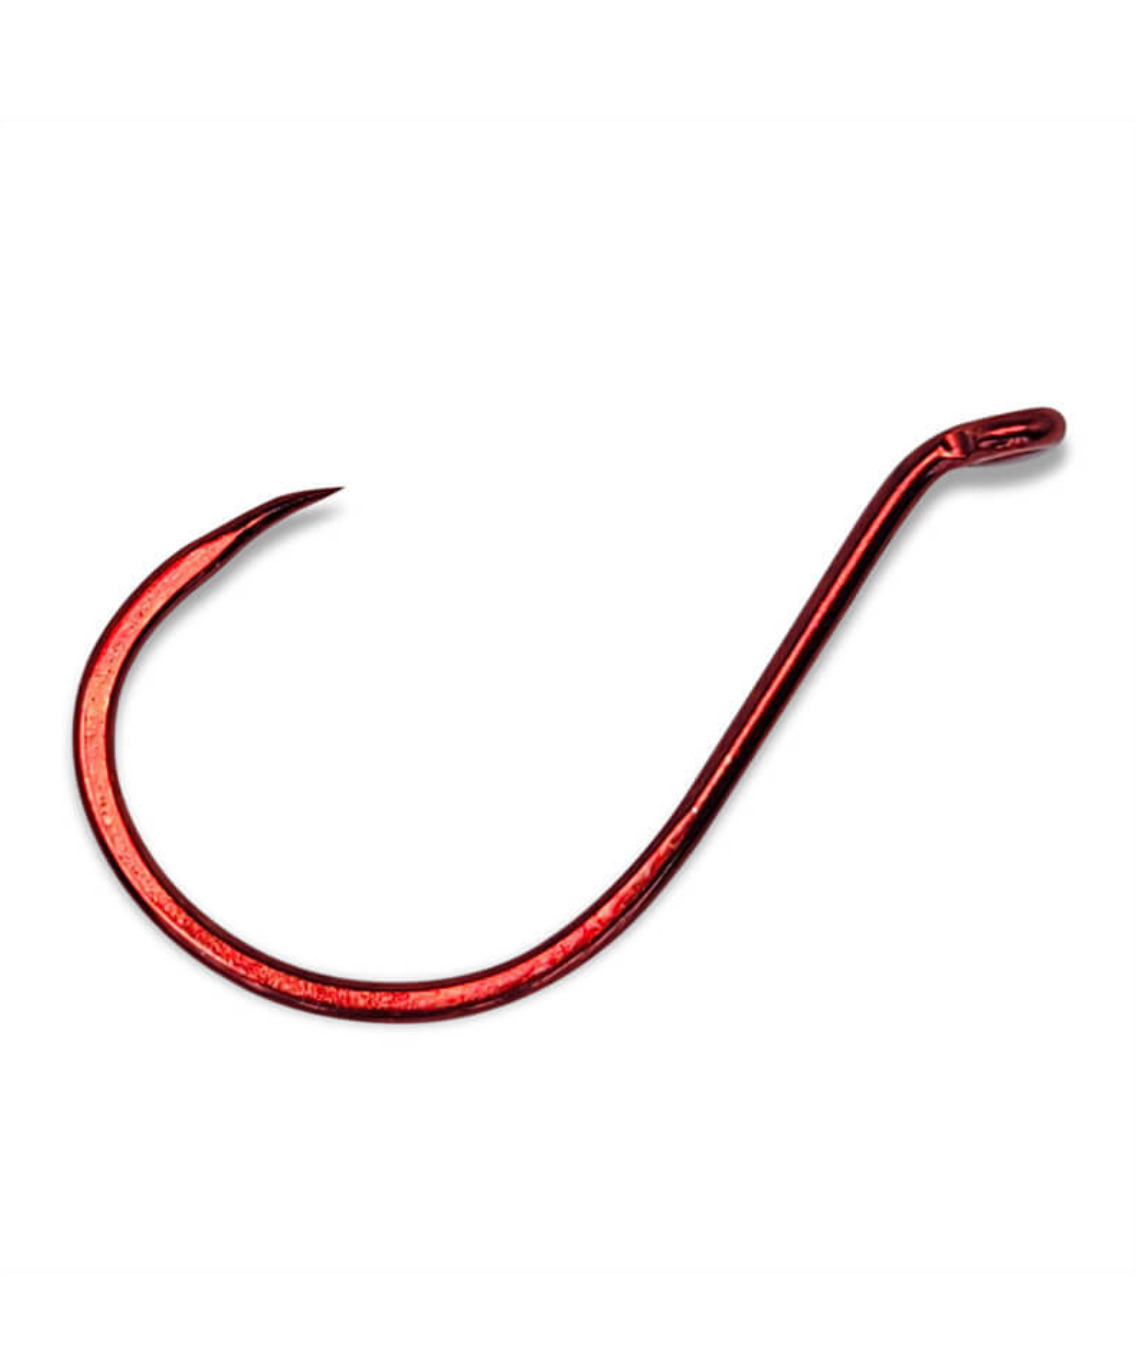 Gamakatsu Octopus Barbless Hooks - 8 Pack - Red - Size 2